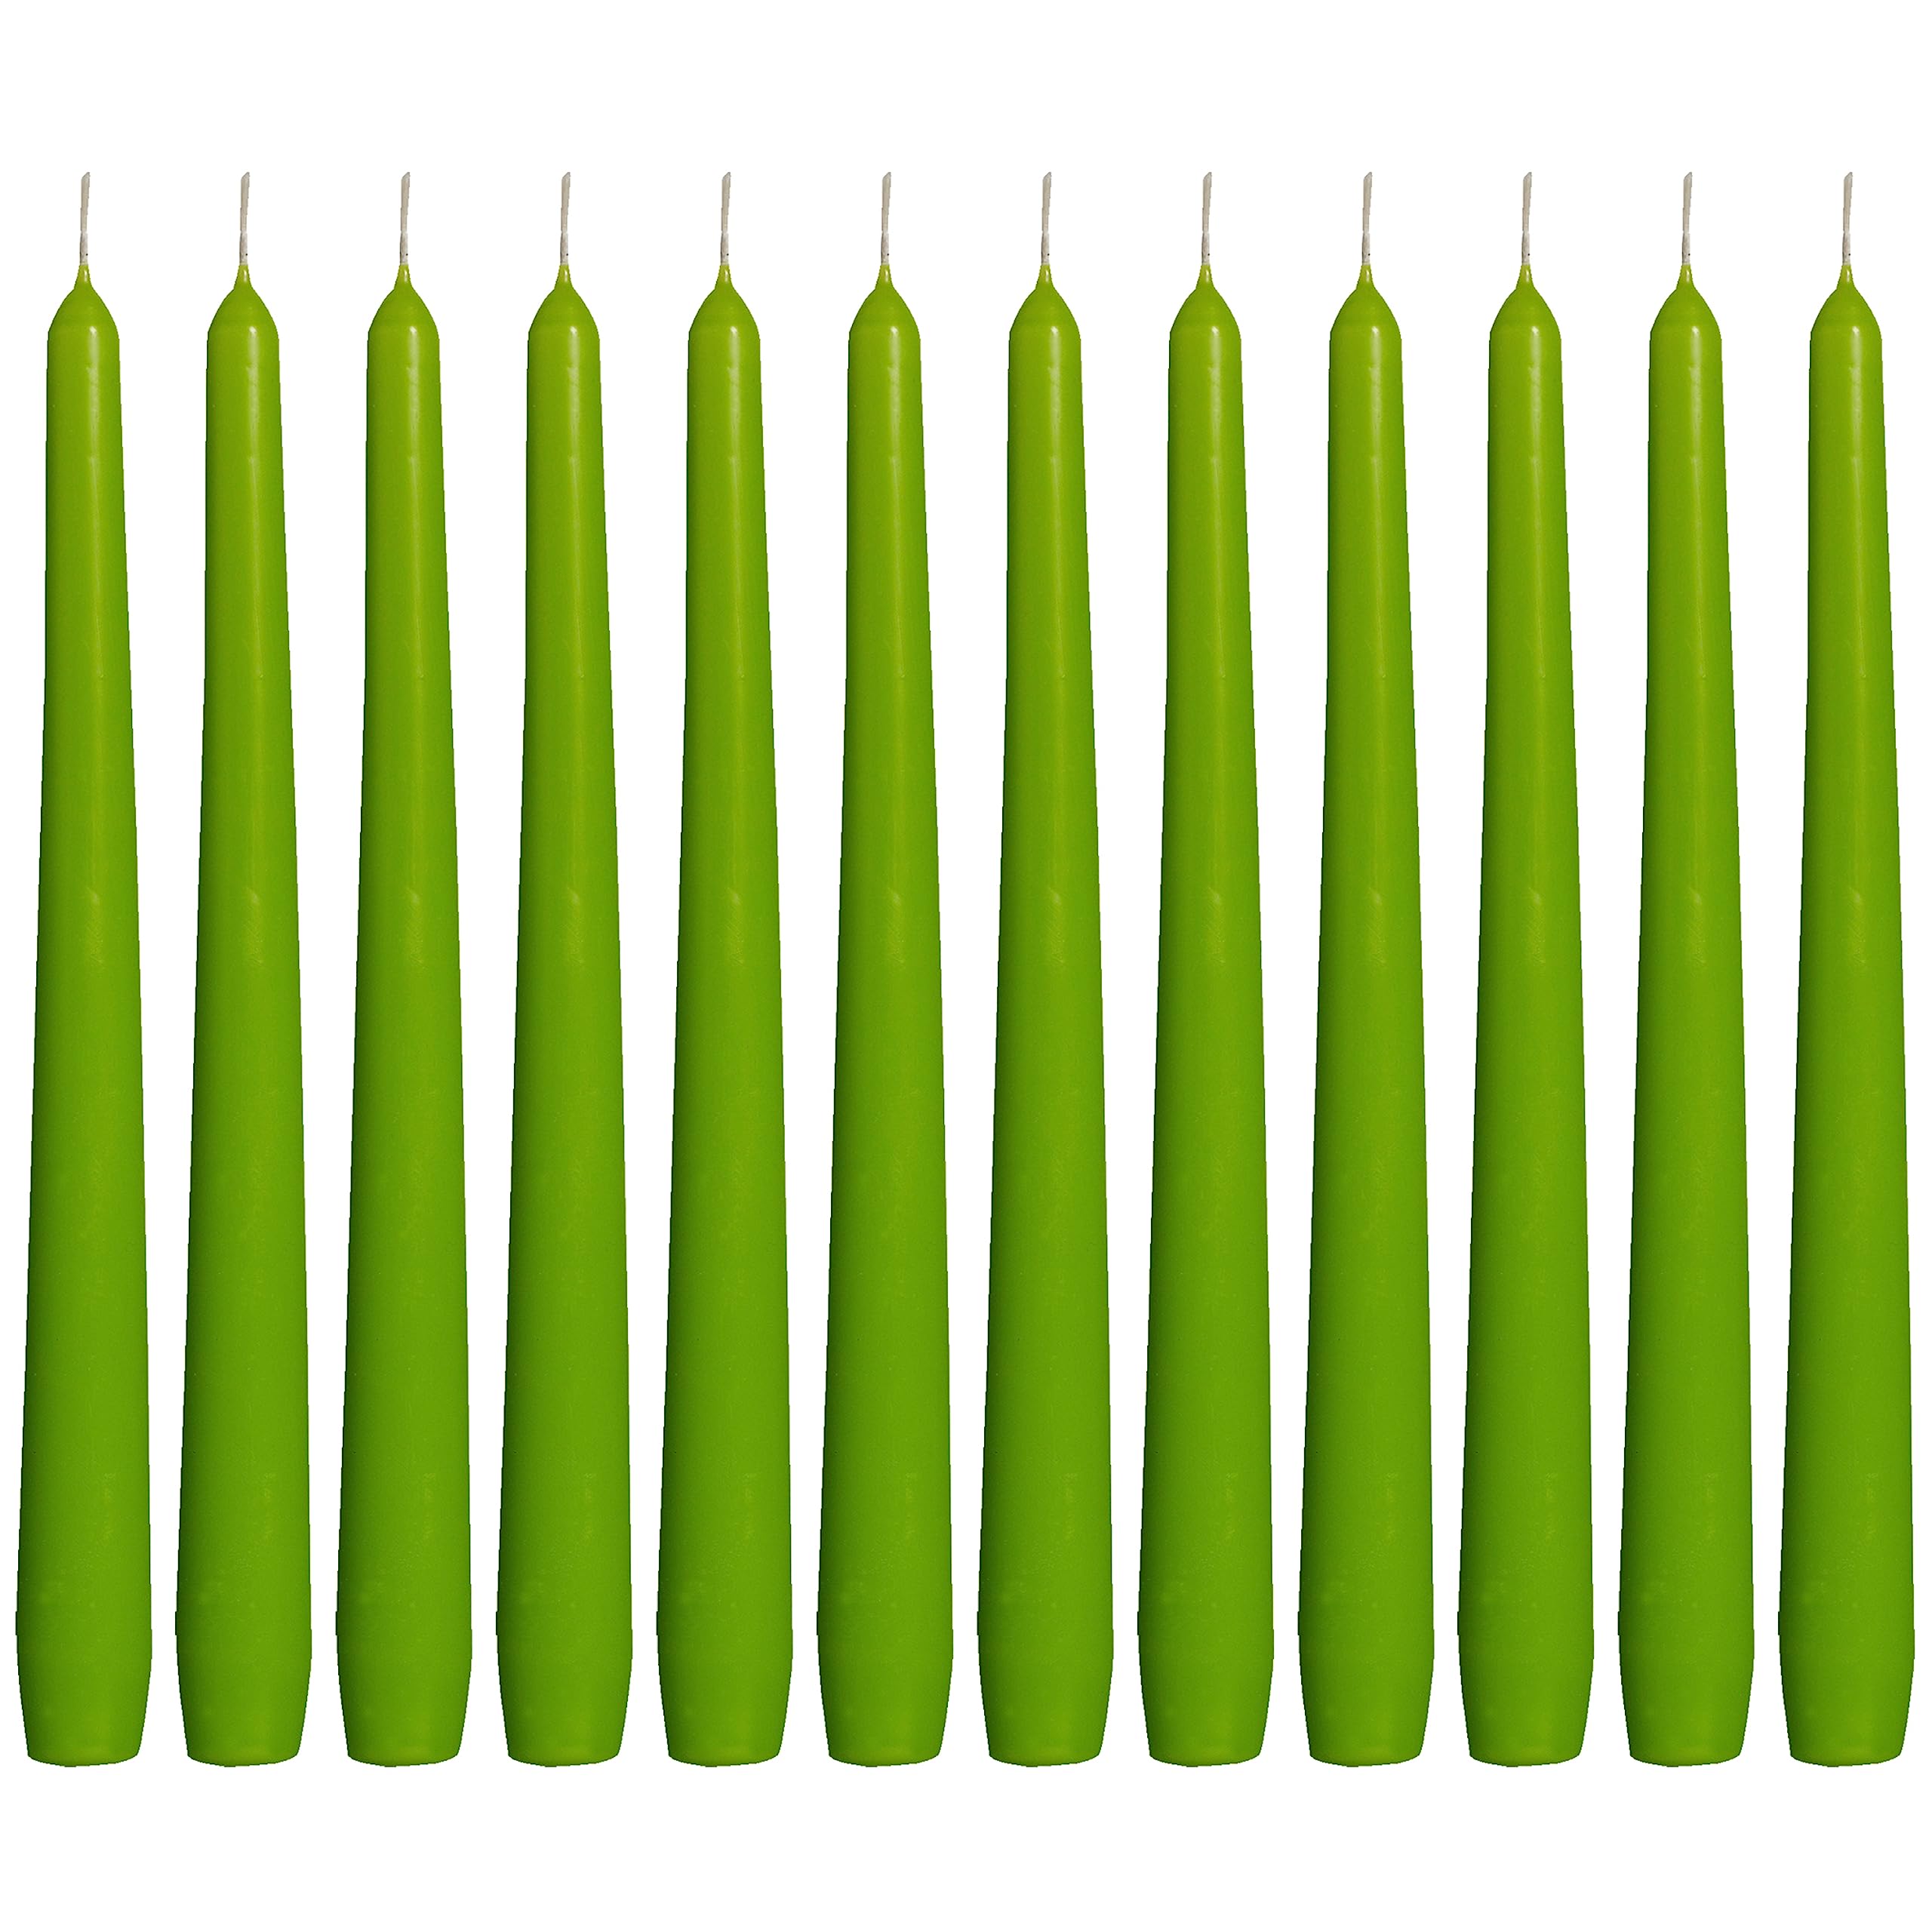 BOLSIUS Lime Green Taper Candles - 12 Pack Individually Wrapped Unscented 10 Inch Dinner Candle Set - 8 Burn Hours - Premium European Quality - Smokeless & Dripless Wedding, Decor & Party Candlesticks  - Like New